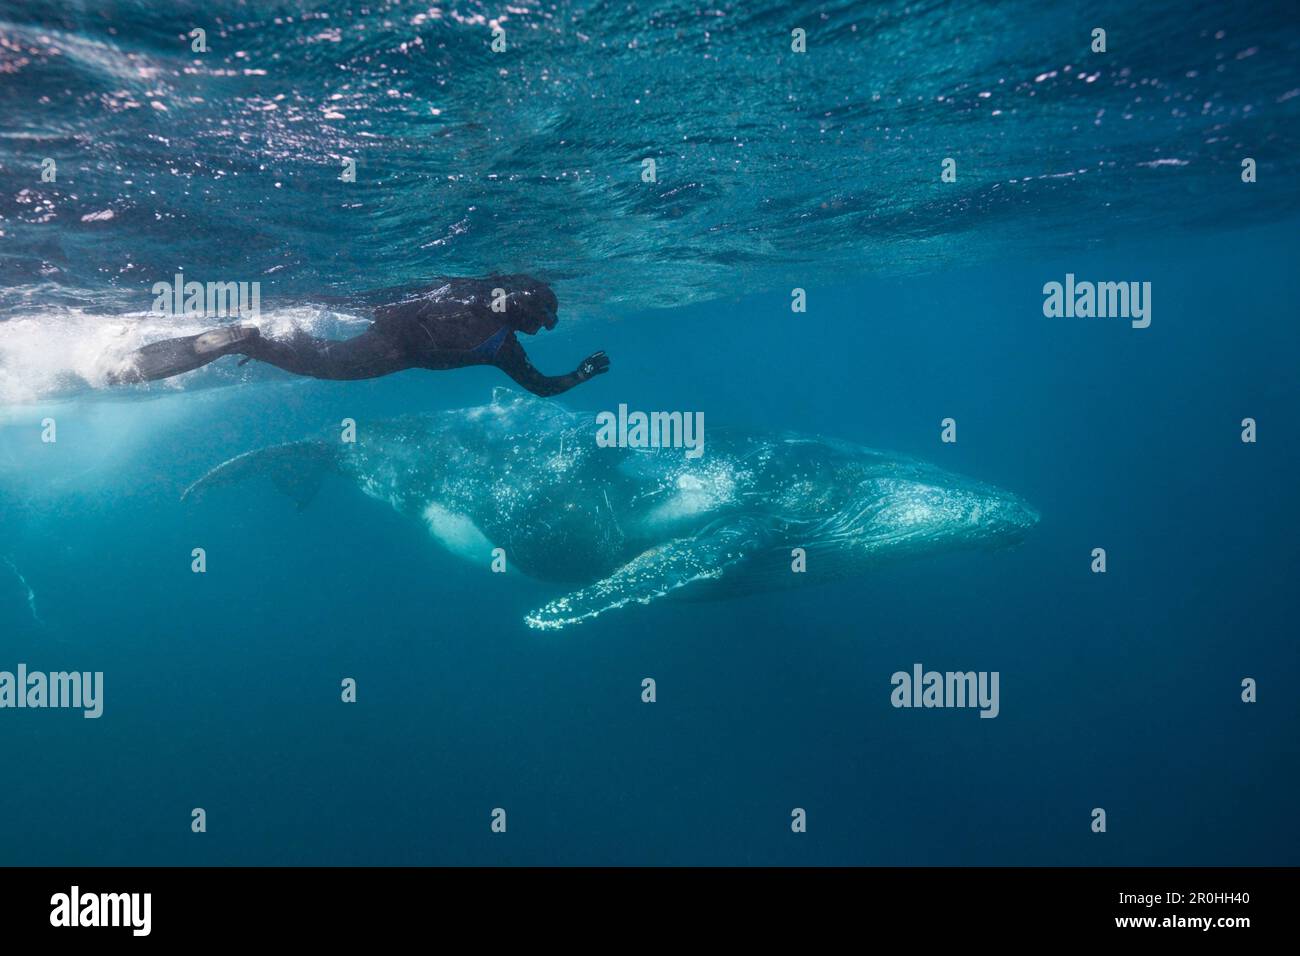 Humpback Whale and Free Diver, Megaptera novaeangliae, Indian Ocean, Wild Coast, South Africa Stock Photo